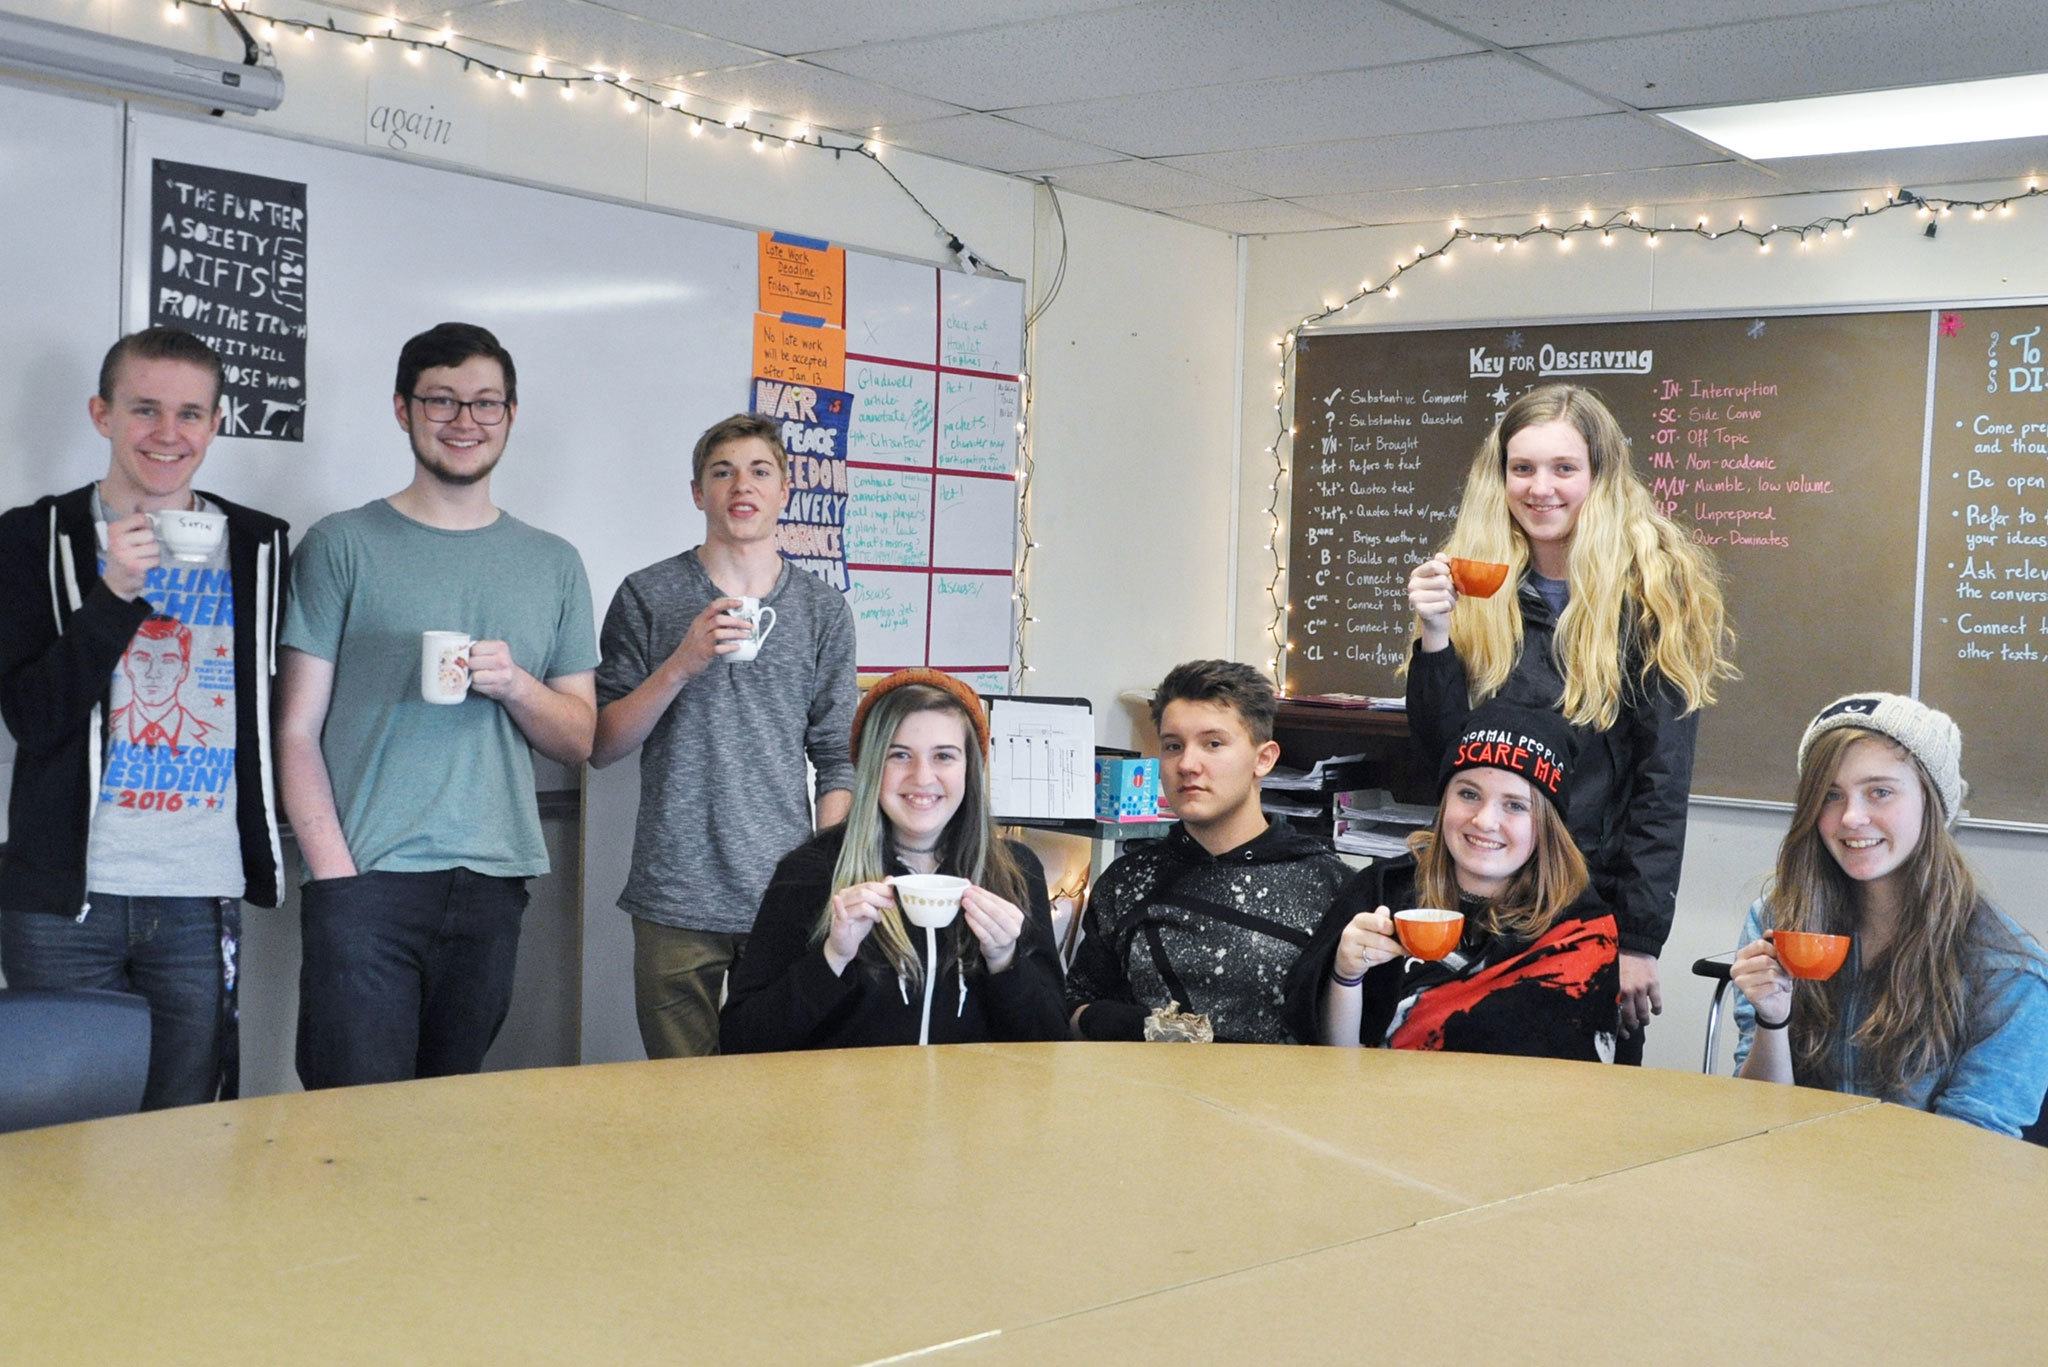 Sequim High School students (from left) Christopher Heintz, Riley Chalk, Seth Johnson, Angeli Chandler, Michael Cole, Madison Grider, Irie Reeder (standing) and Izzy Gawley gather in Nellie Bridge’s classroom one day each week after school to sit, sip tea and chat together. Photo by Patsene Dashiell